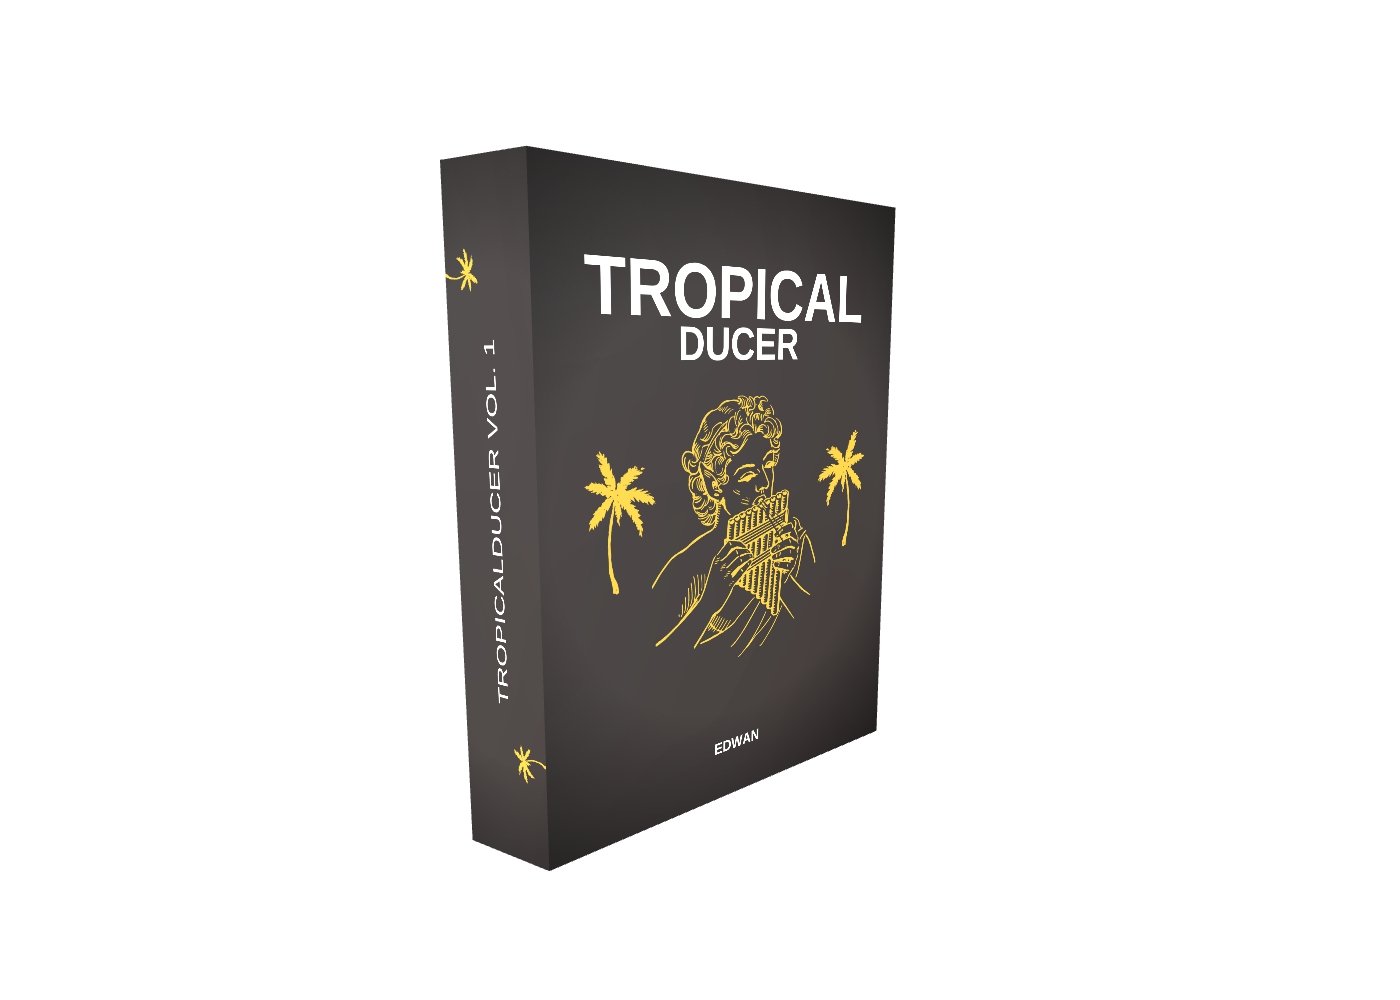 Tropicalducer Vol. 1 - Tropical House Samples and Presets Pack - BRODUCER by EDWAN - Best EDM FLPs, sample packs & Broducer merch